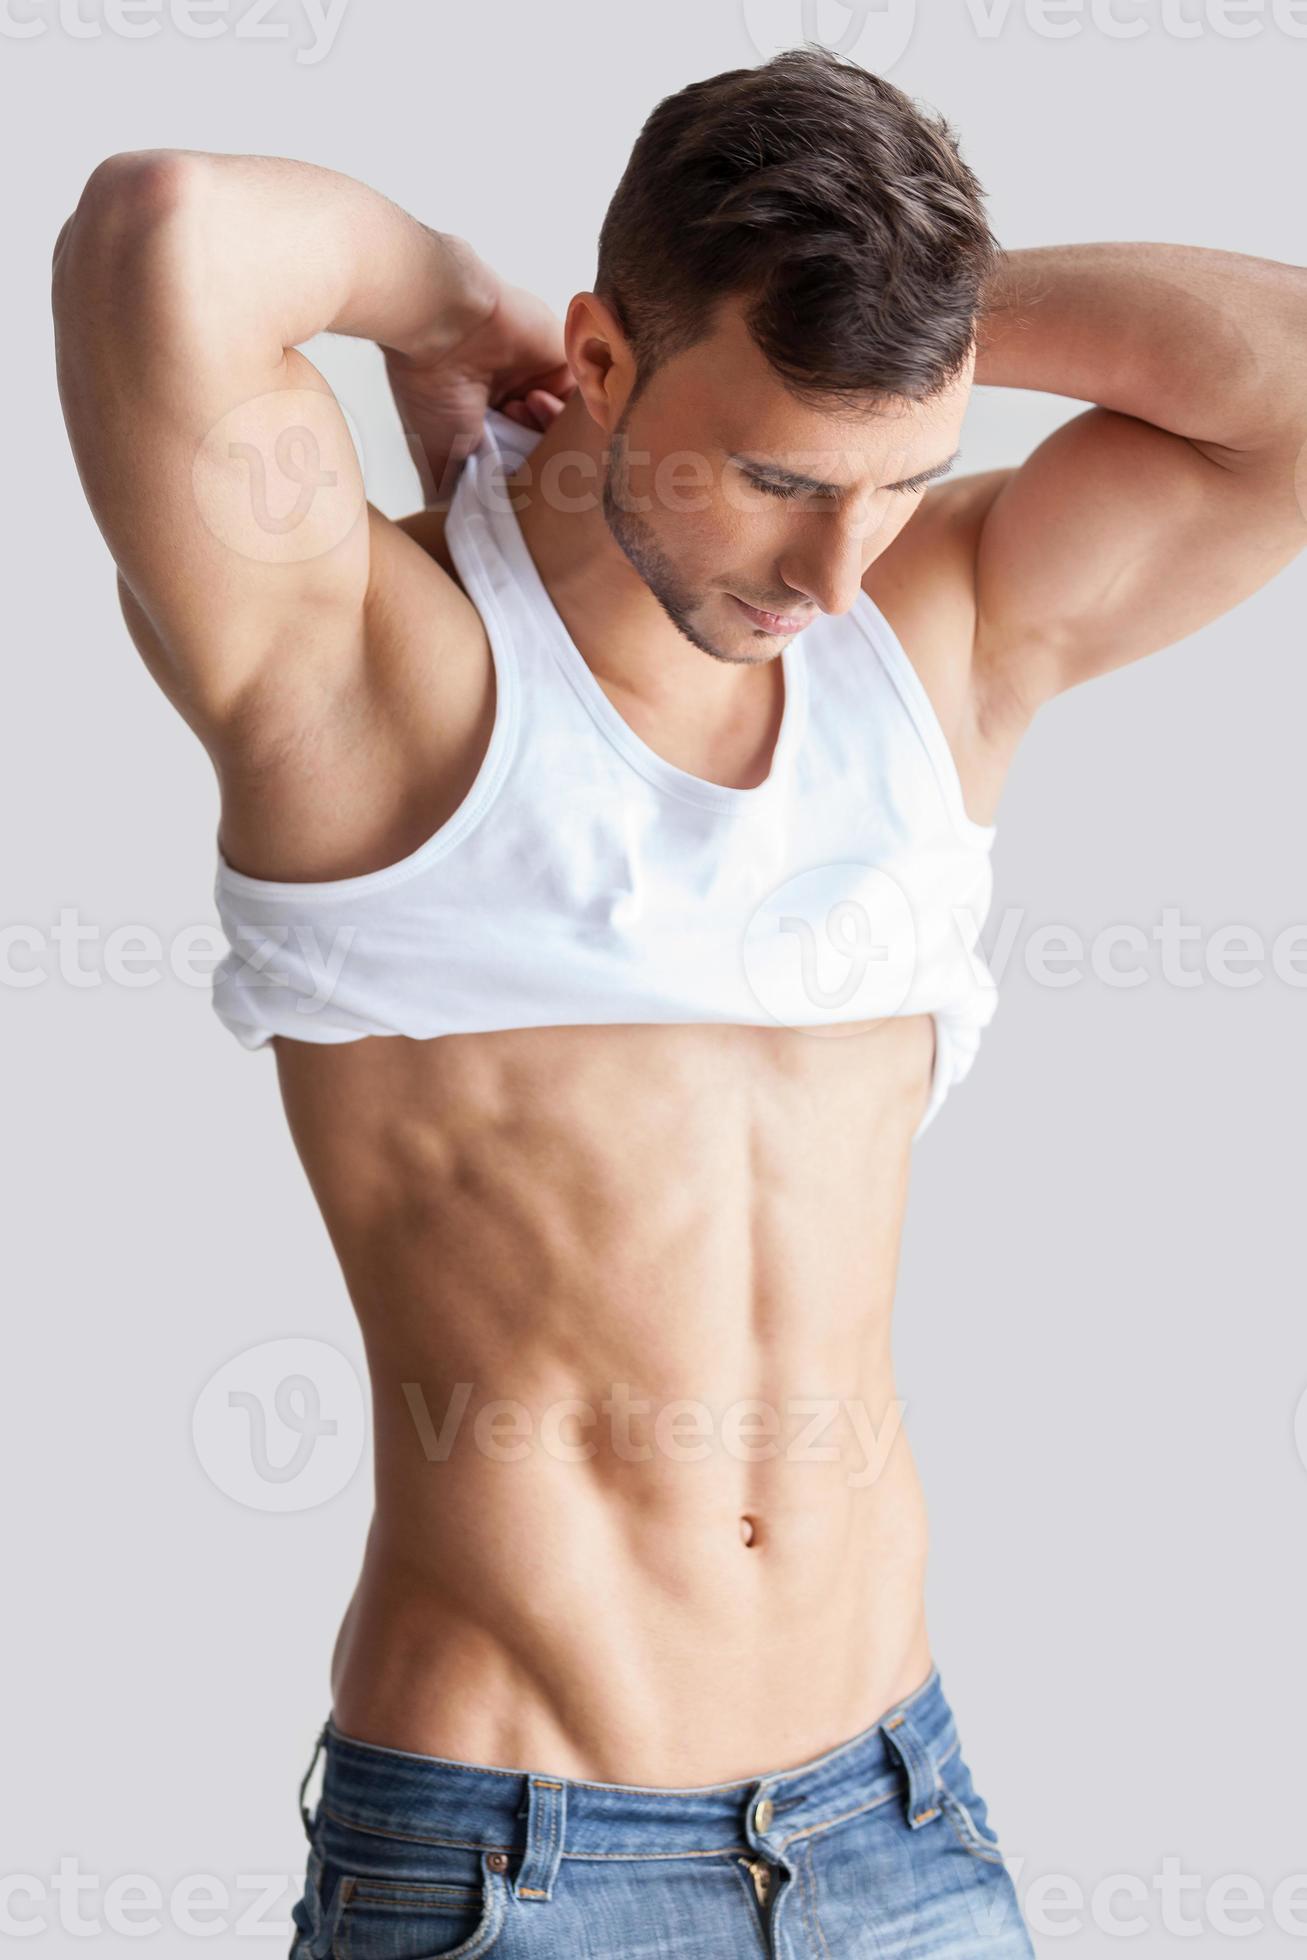 Man undressing. Handsome young muscular man taking off his tank